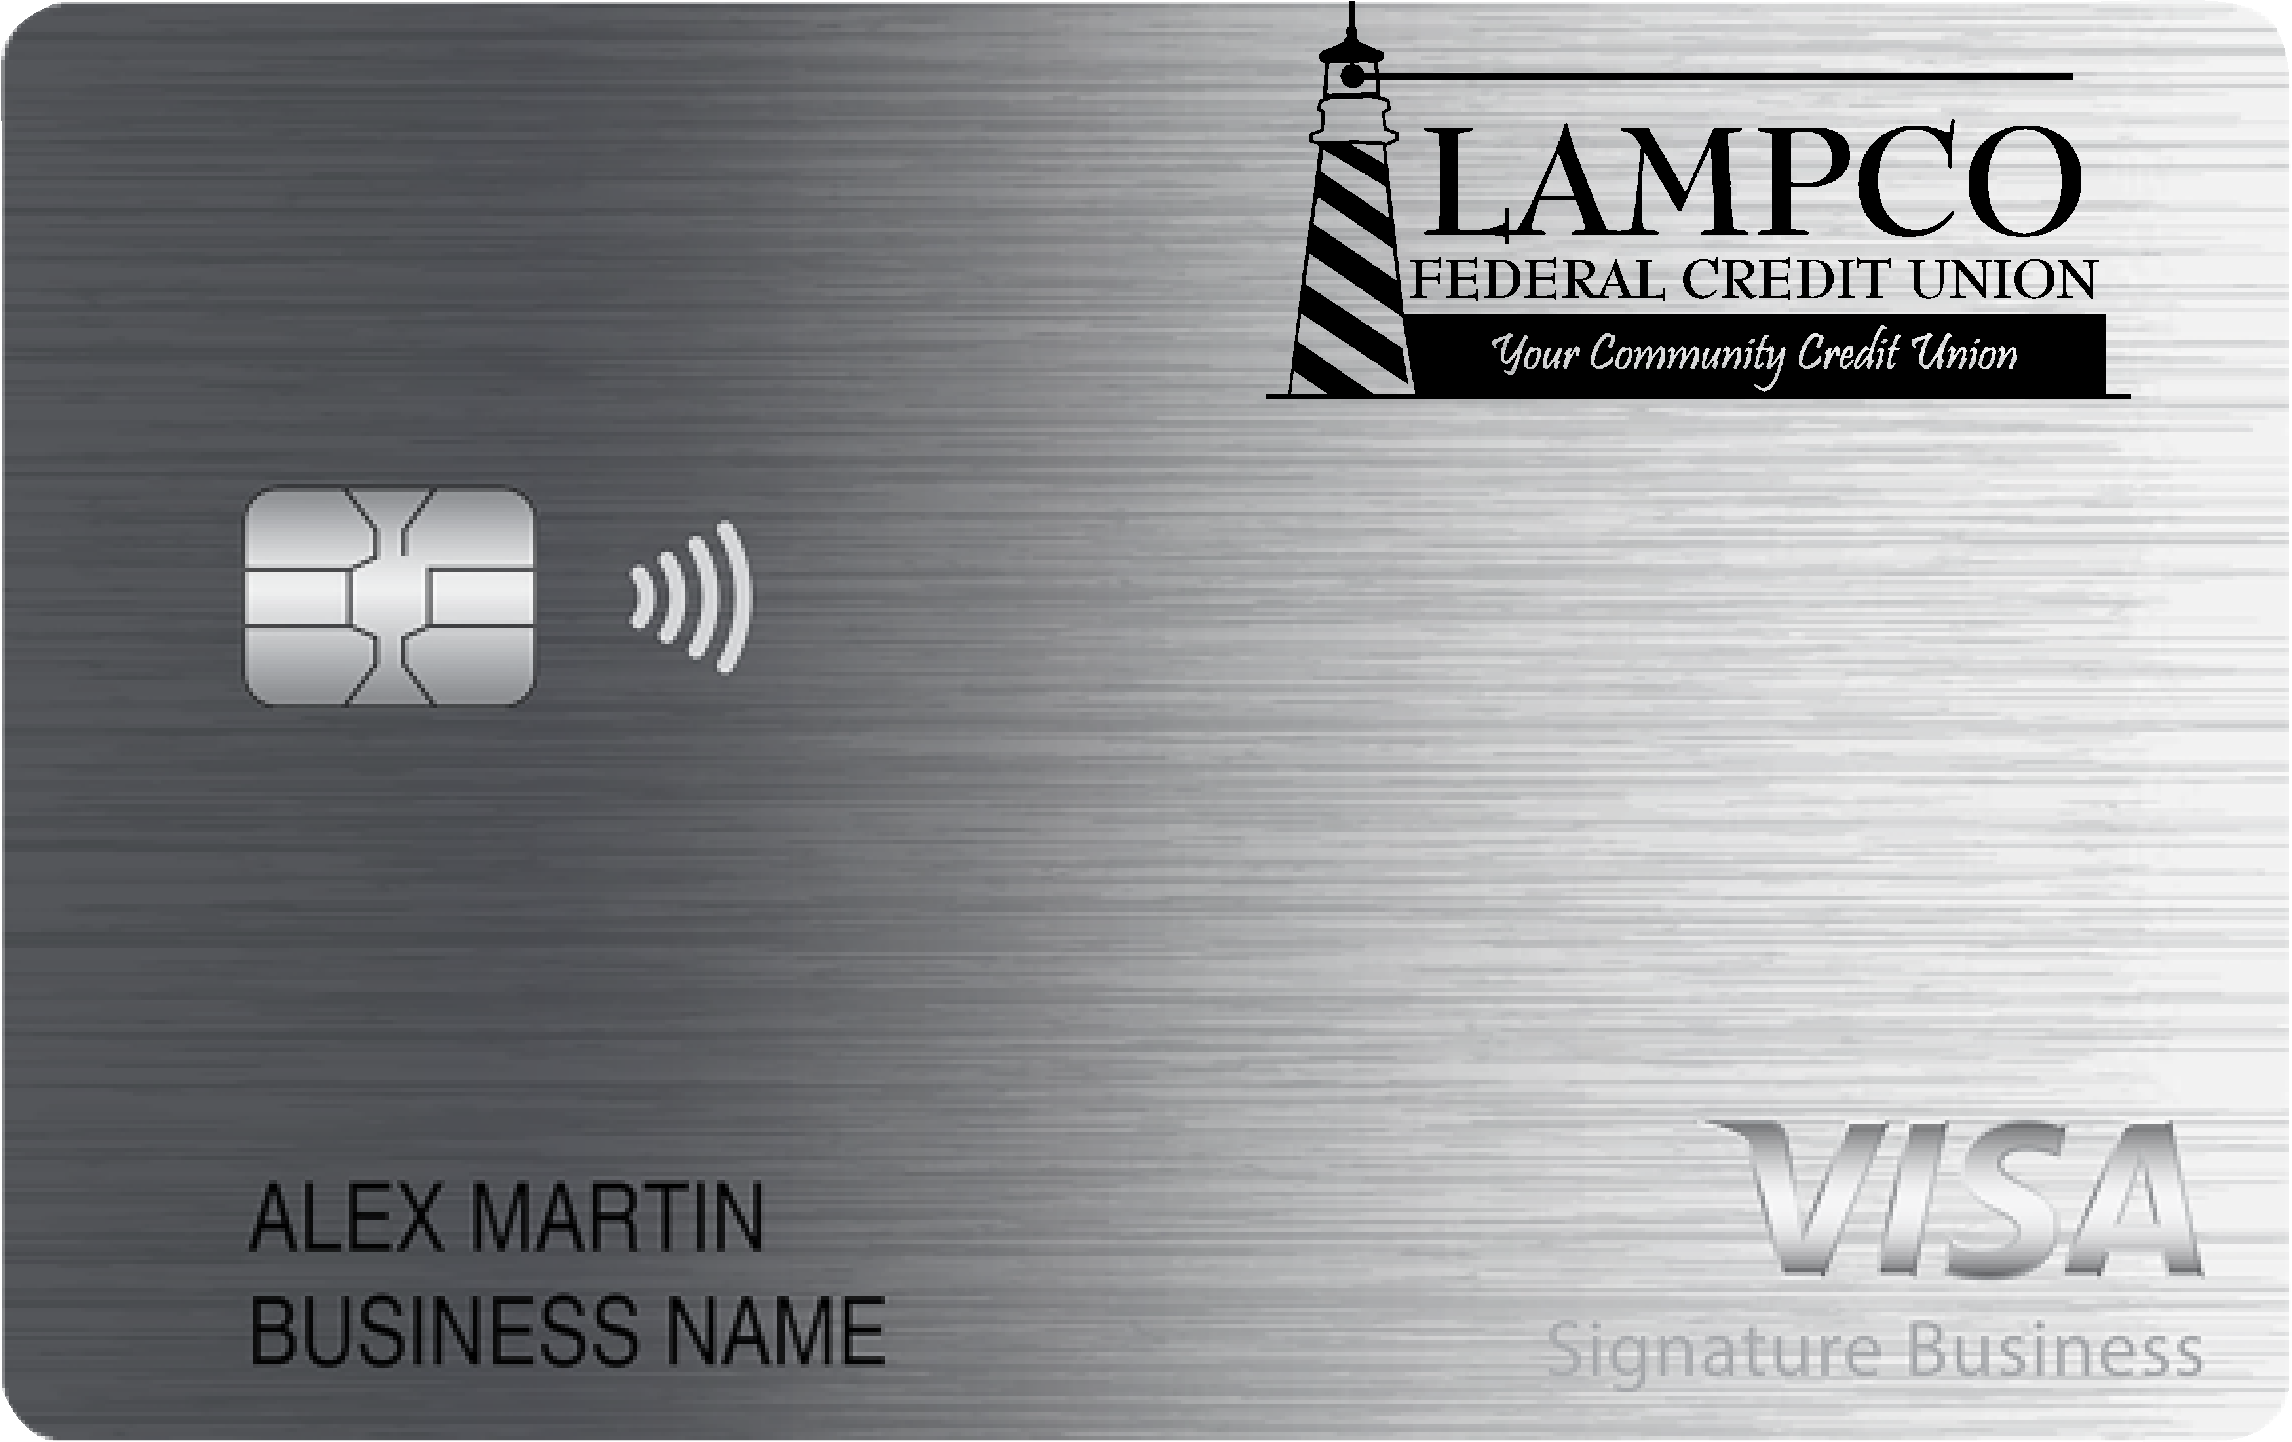 Lampco Federal Credit Union Smart Business Rewards Card